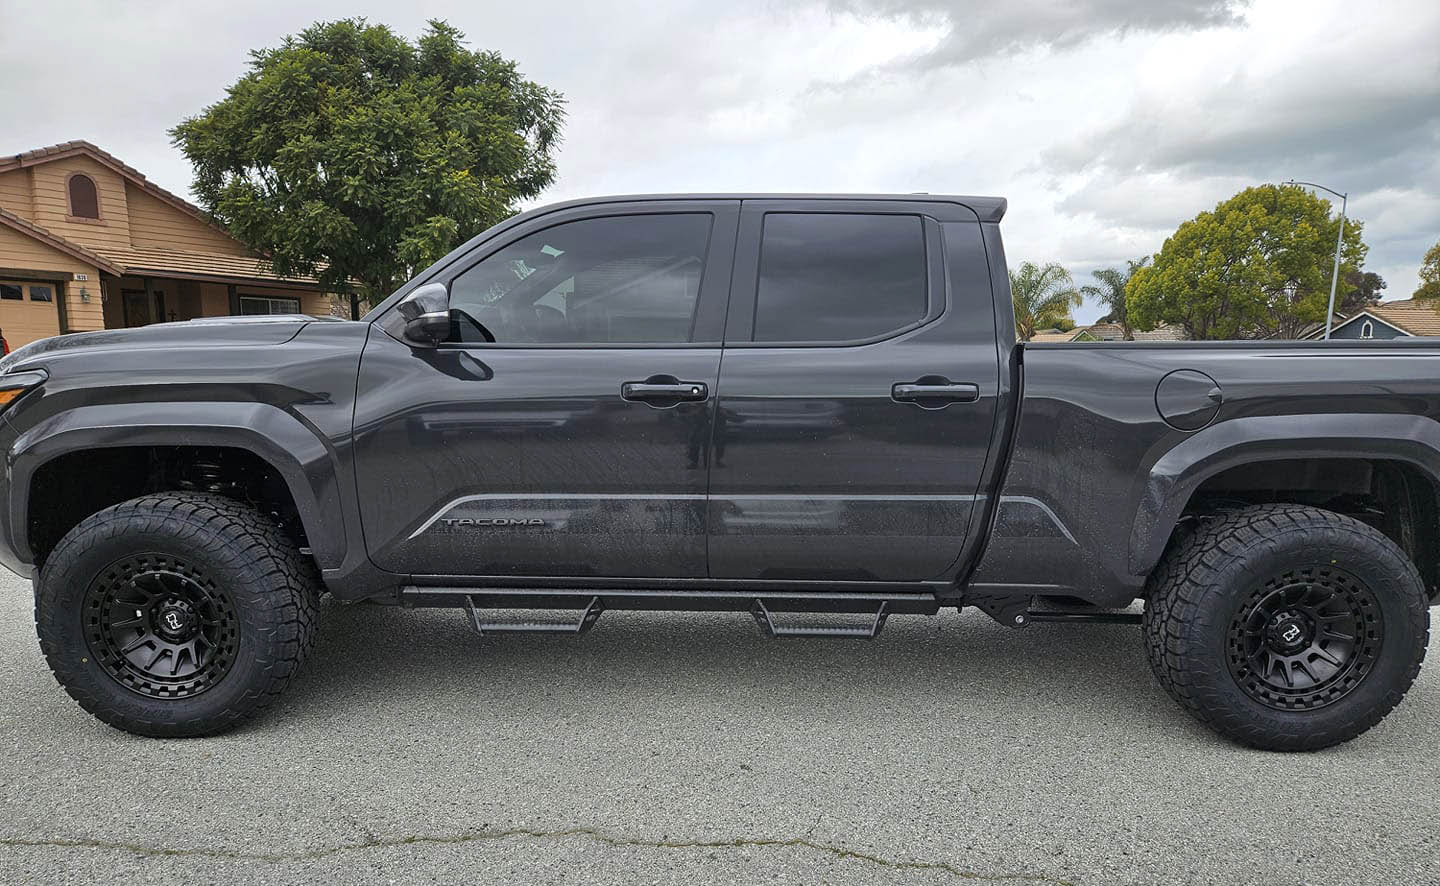 2024 Tacoma Official UNDERGROUND 2024 Tacoma Thread (4th Gen) 6-ft longbed 2024 Tacoma TRD Sport on 18%22 Black Rhino Wheels + 305:60R18 TOYO A:T III Tires 